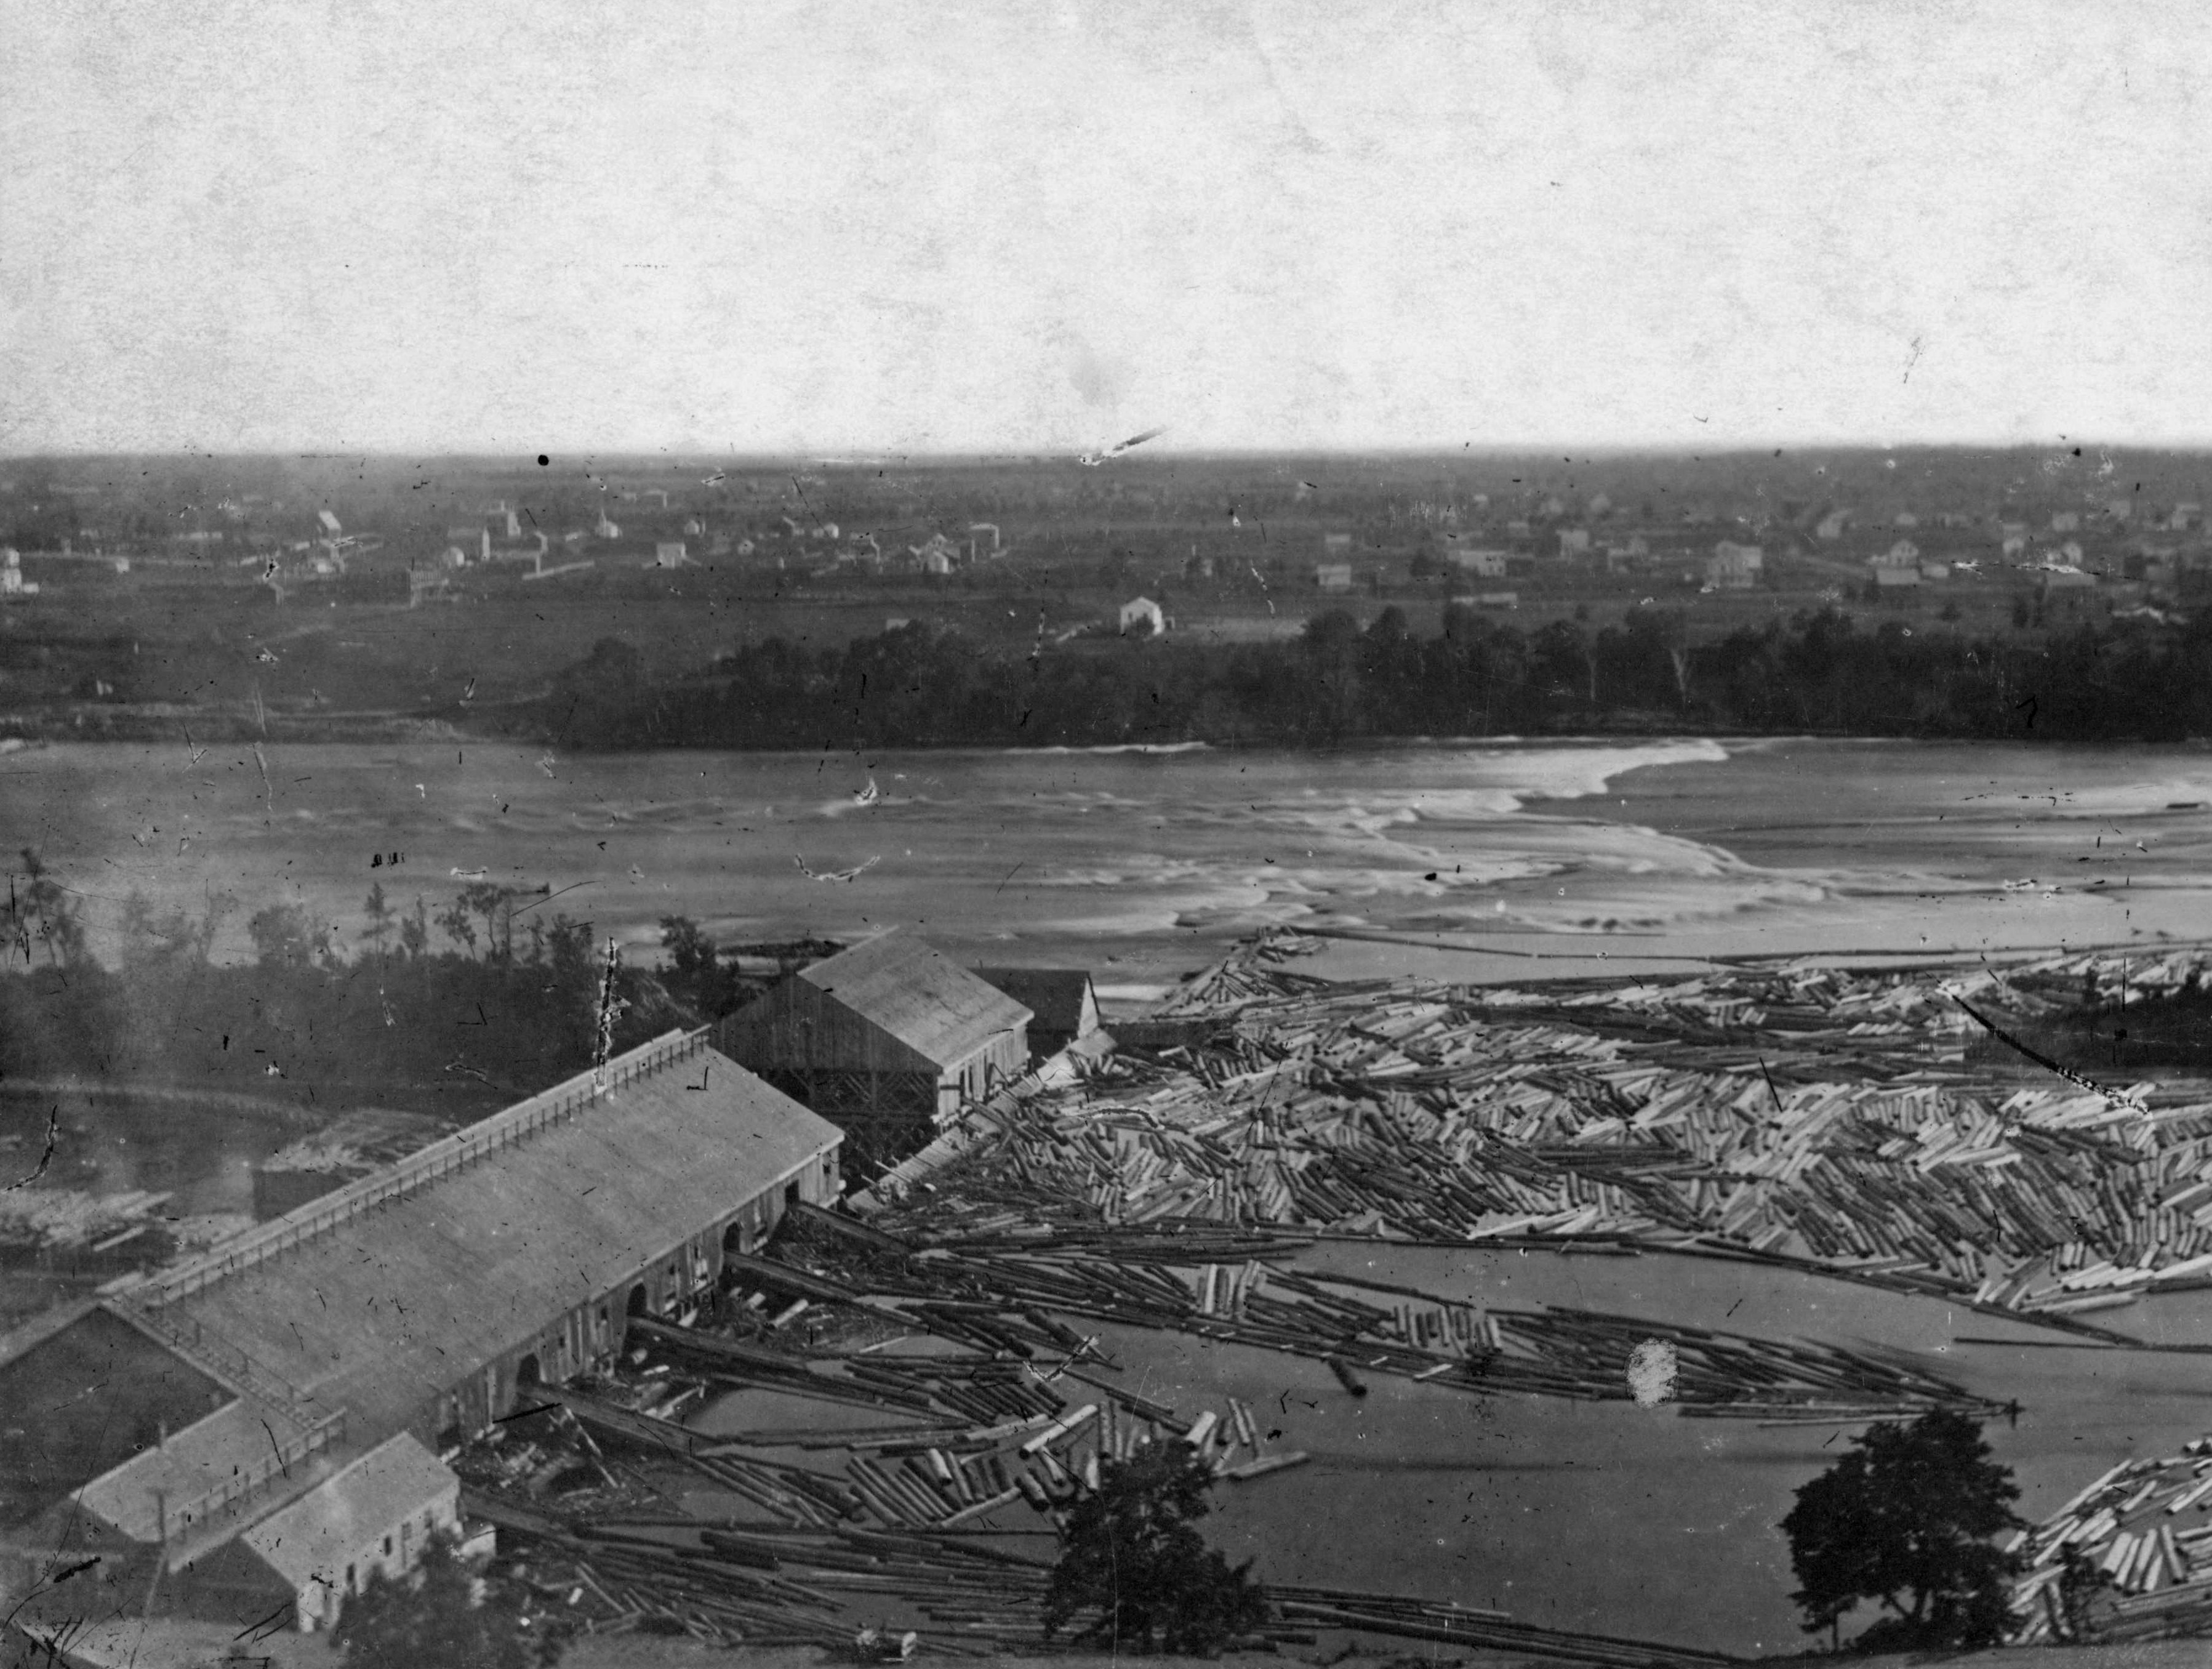 A sawmill on the Mississippi River across from downtown Minneapolis in the 1860s or 1870s processed logs that are floating in the water.